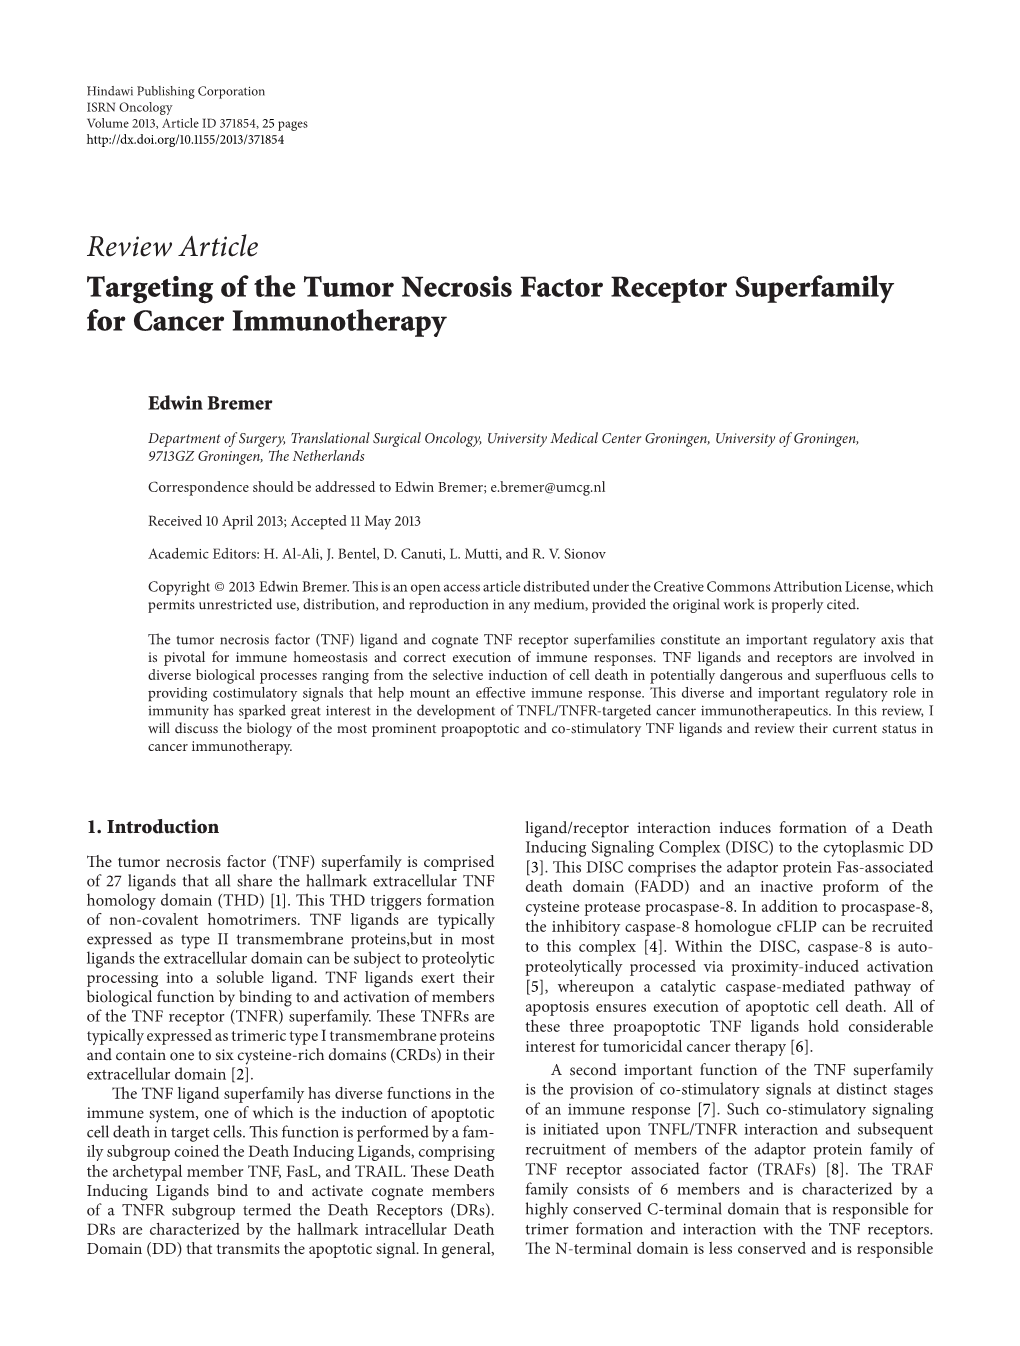 Targeting of the Tumor Necrosis Factor Receptor Superfamily for Cancer Immunotherapy